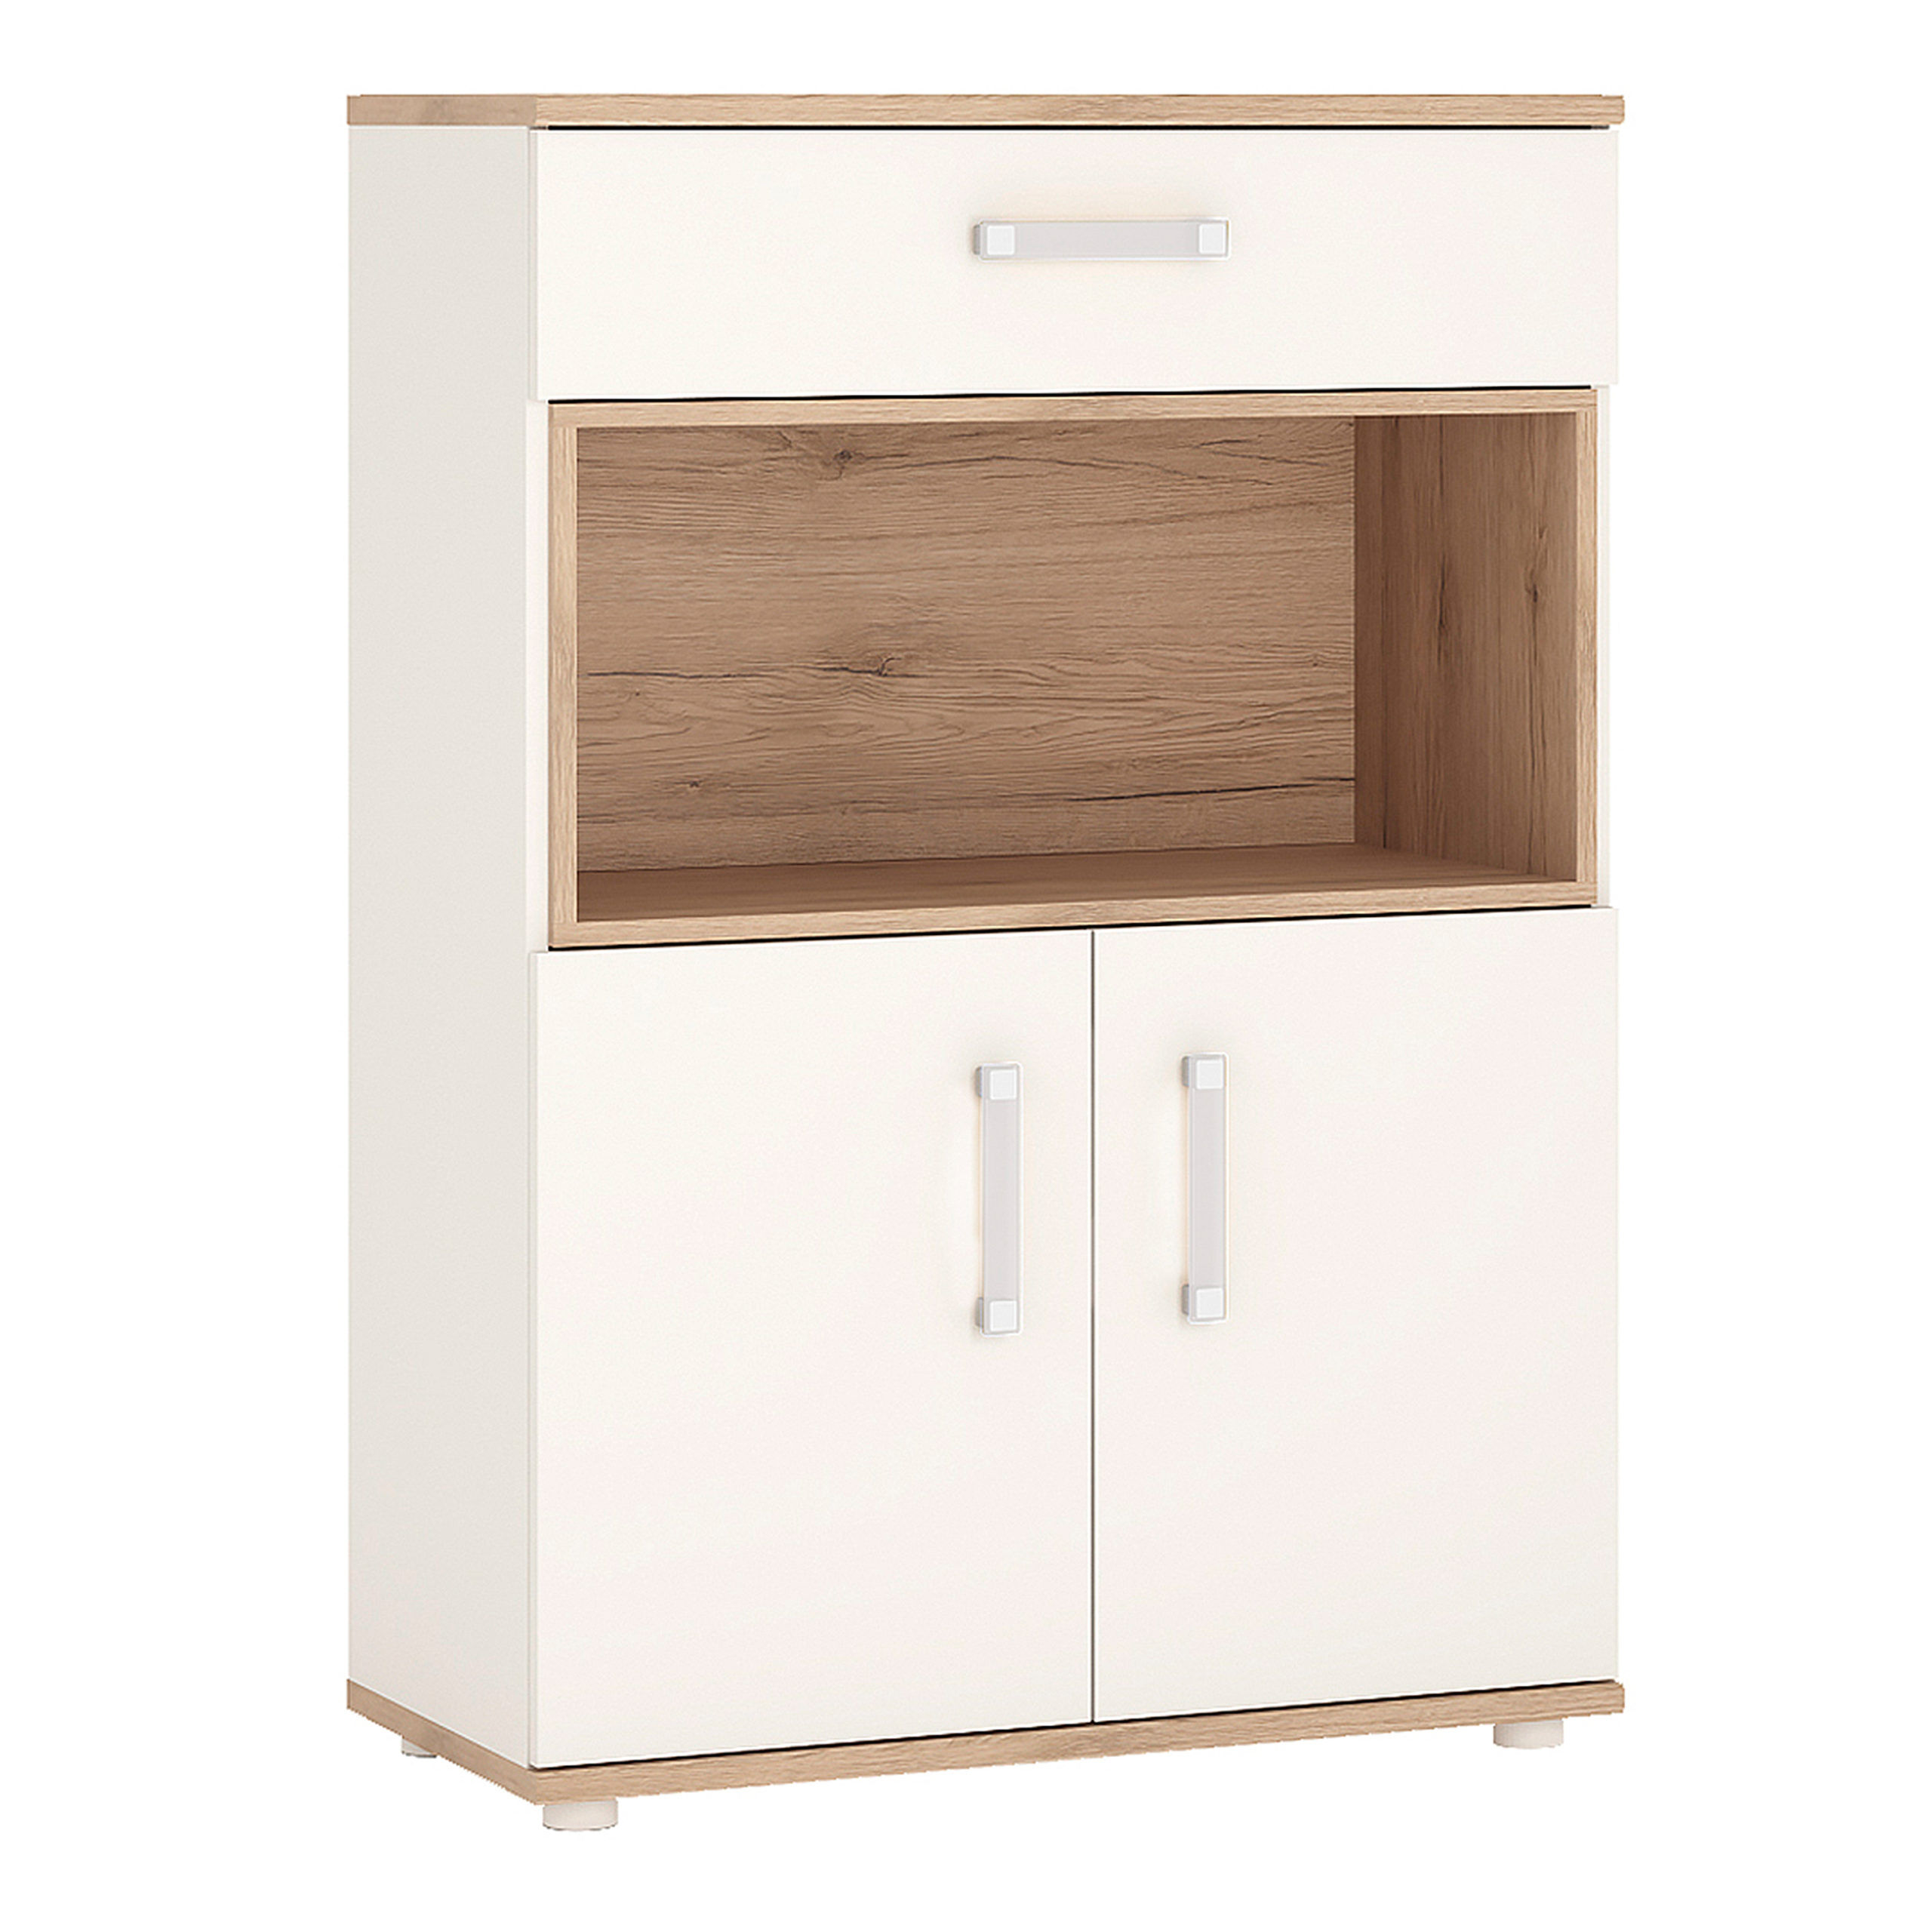 Junior White 2 Door 1 Drawer Cupboard with Open Shelf   Self Assembly Childrens Furniture